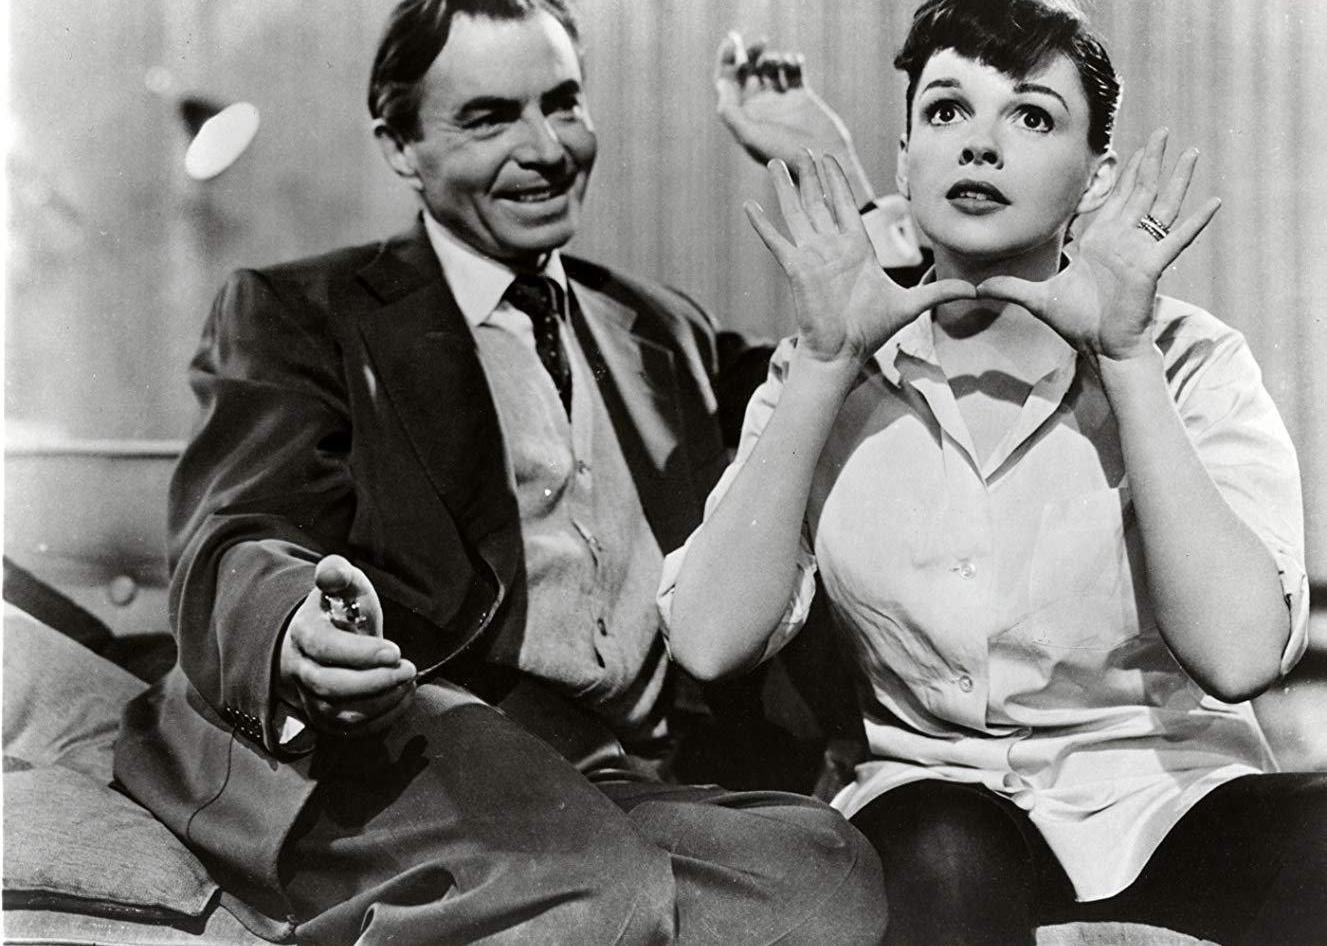 Judy Garland and a man sitting together.